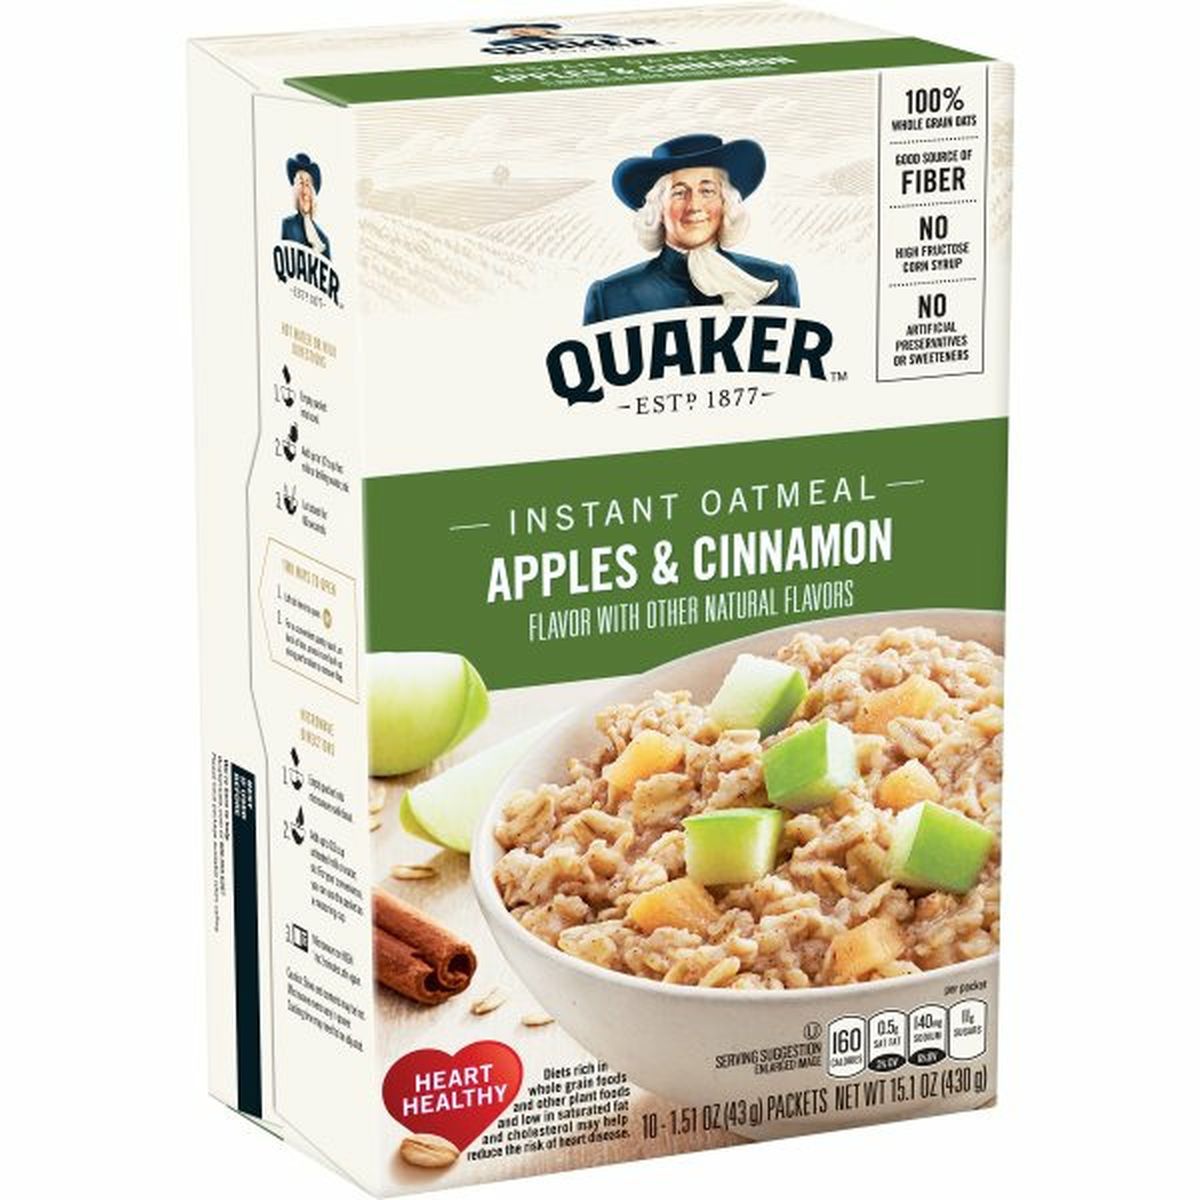 Calories in Quaker Instant Oatmeal Instant Oats Hot Cereal, Apple Cinnamon